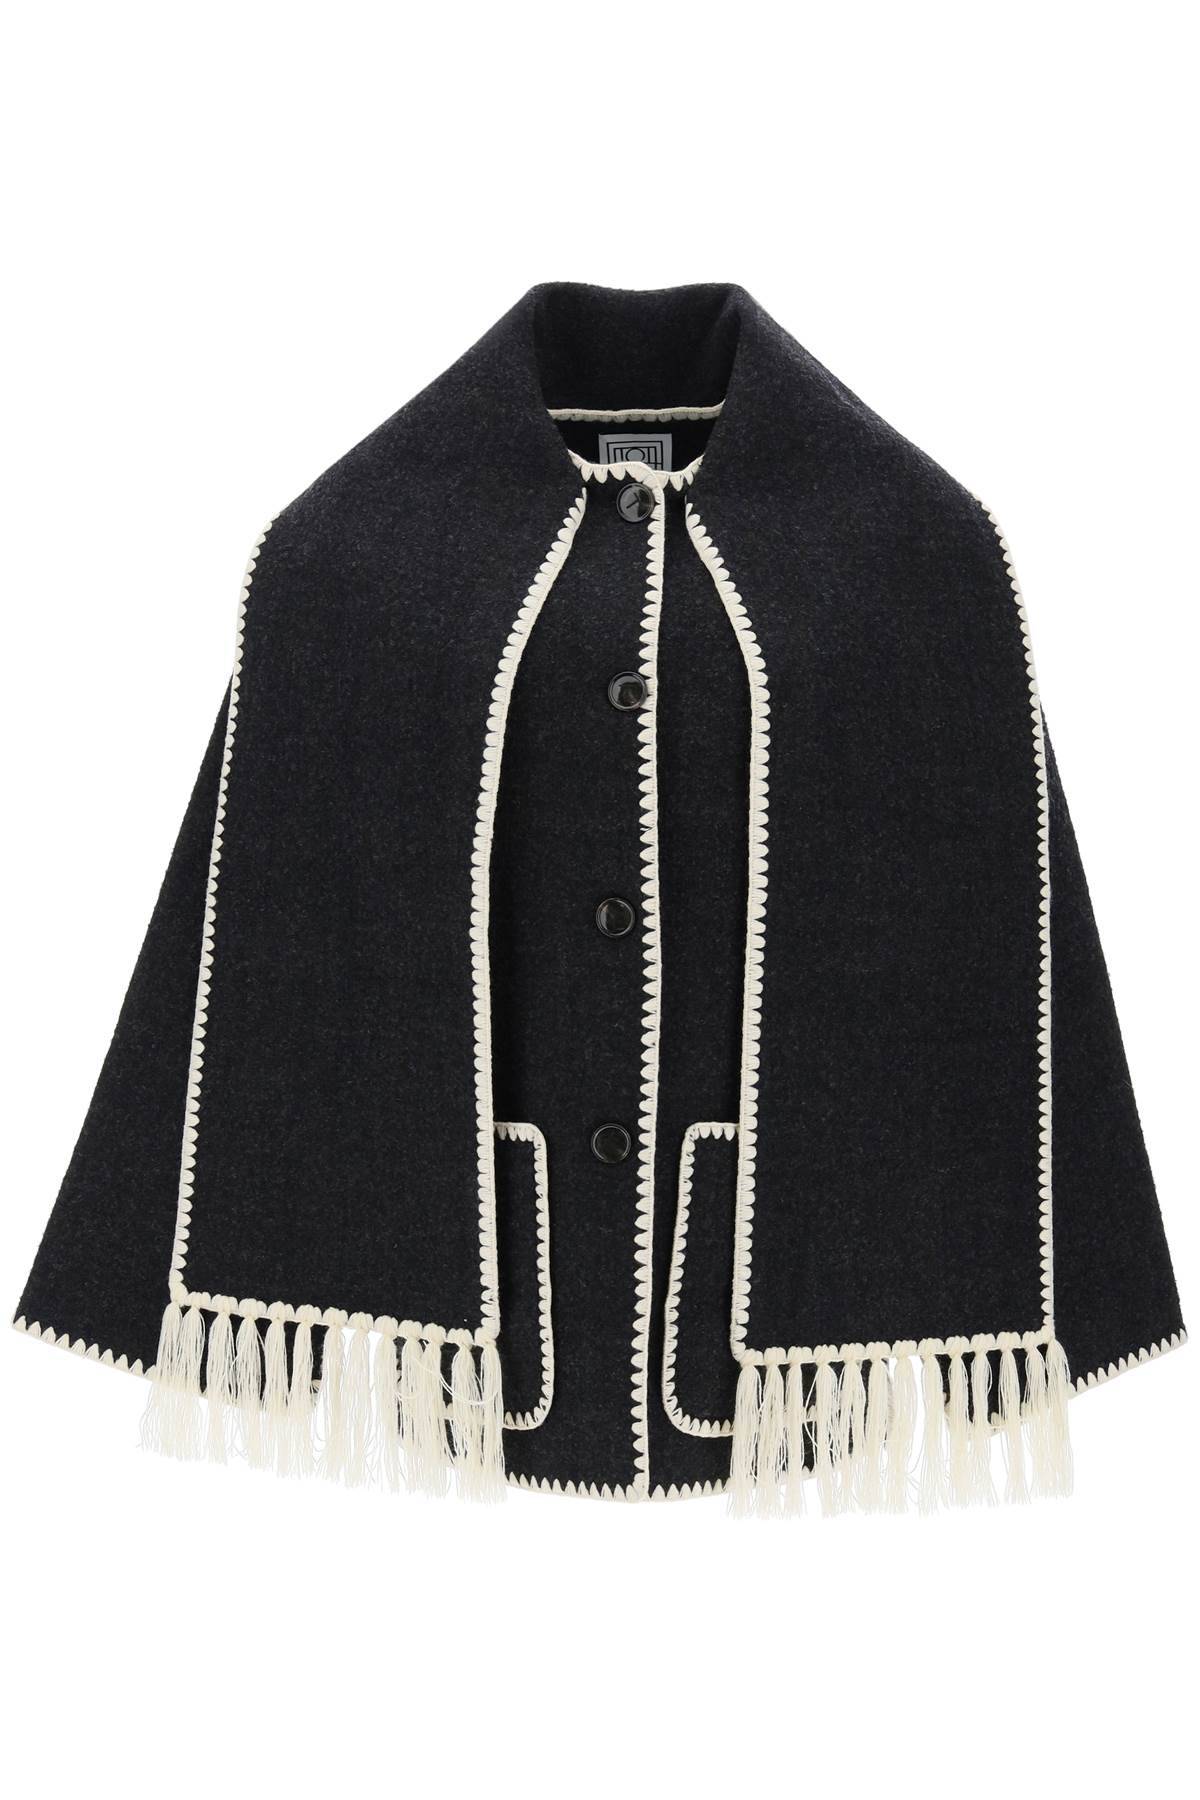 Toteme TOTEME embroidered scarf jacket